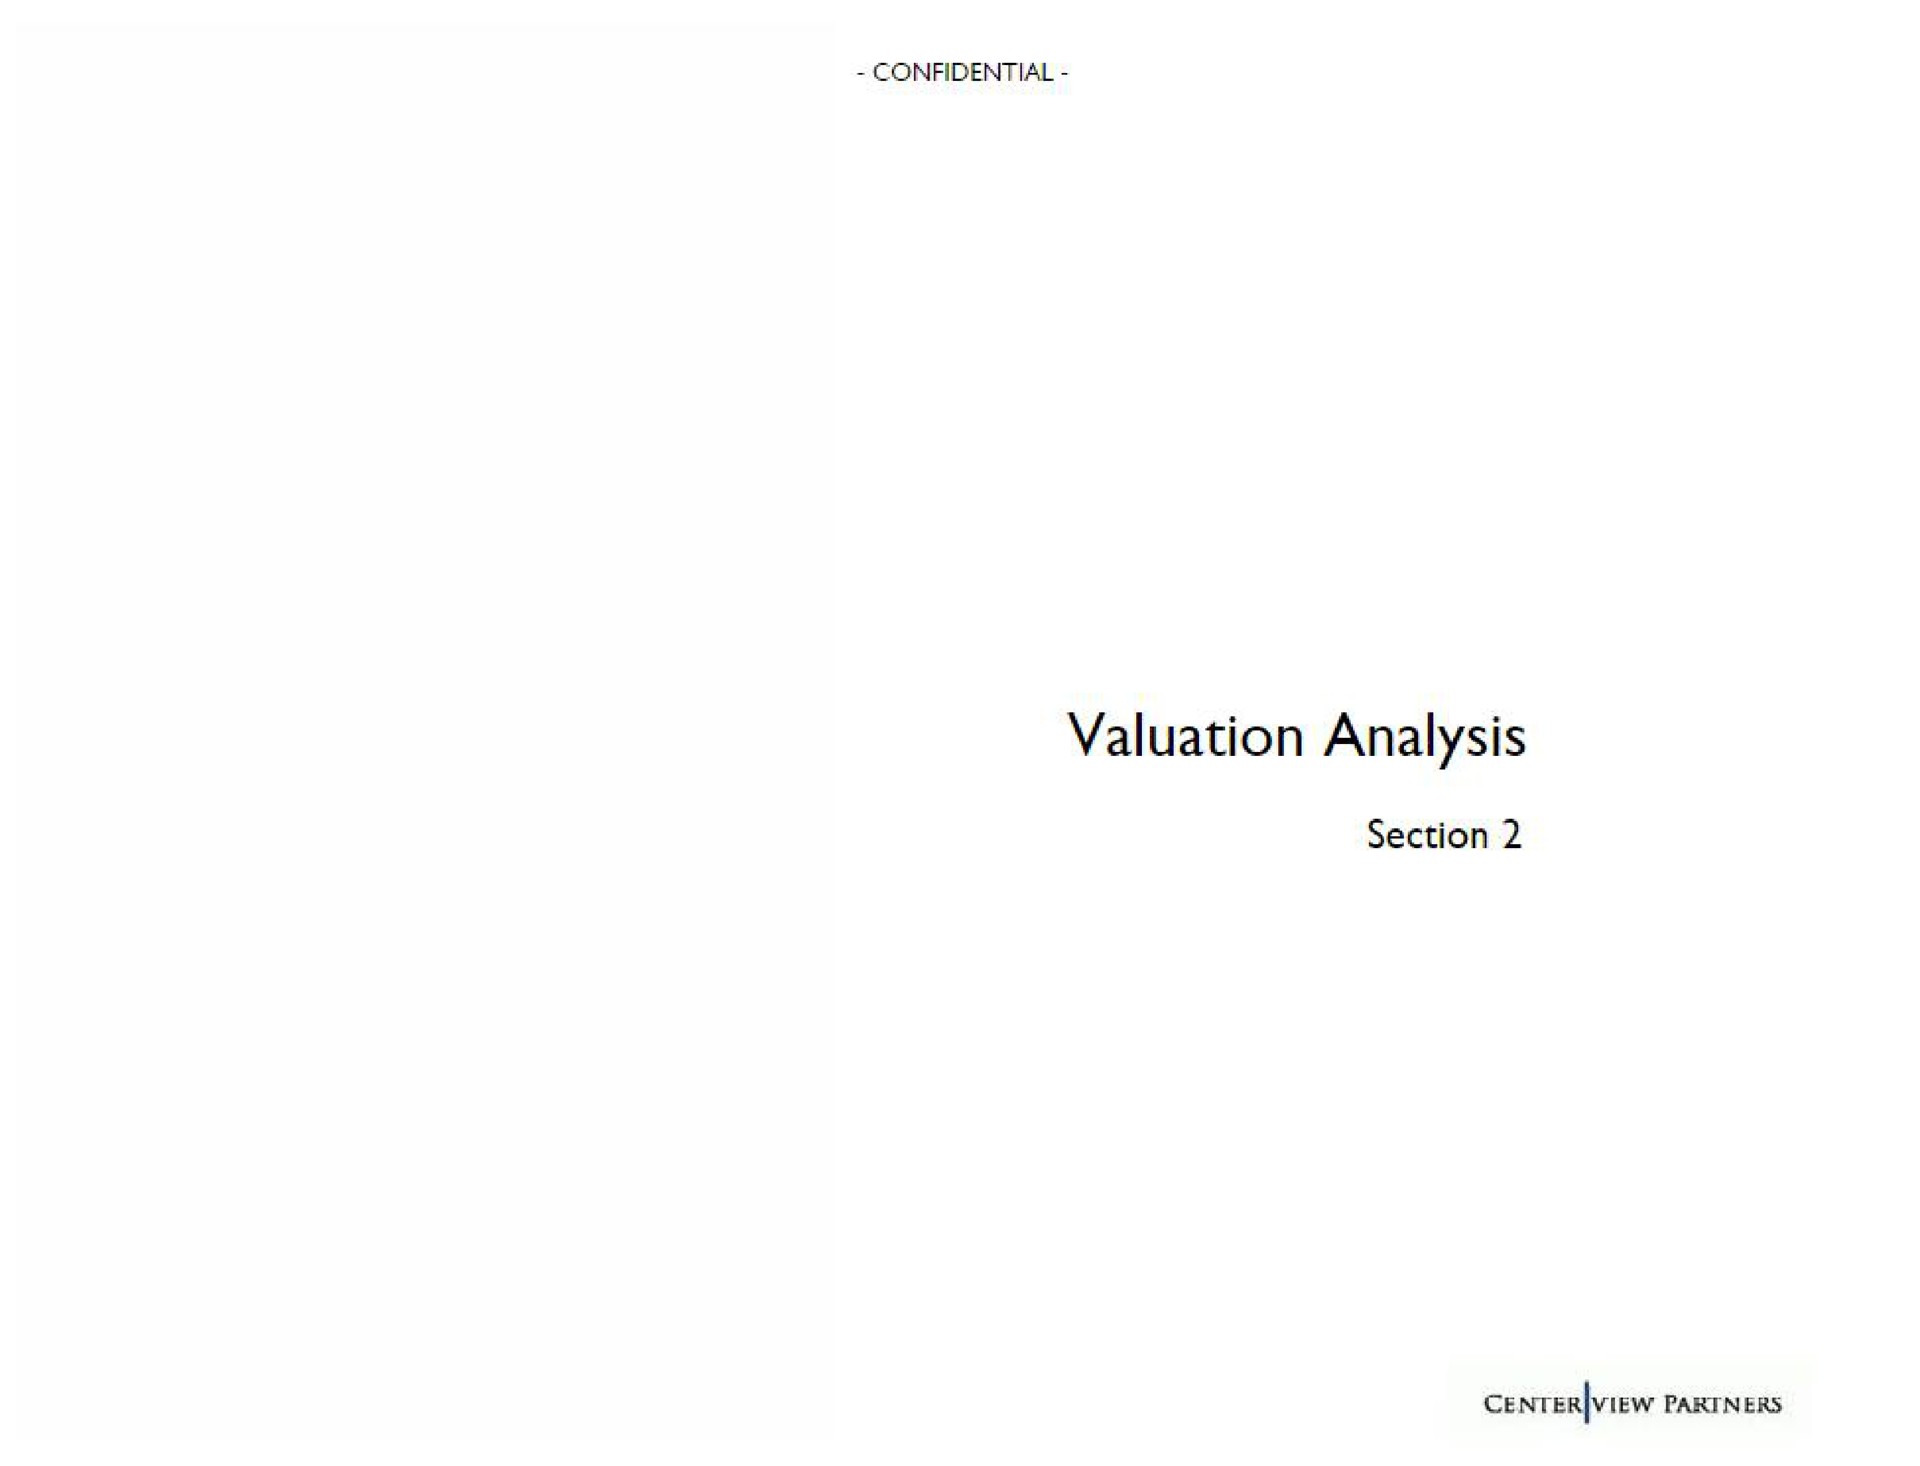 valuation analysis | Centerview Partners